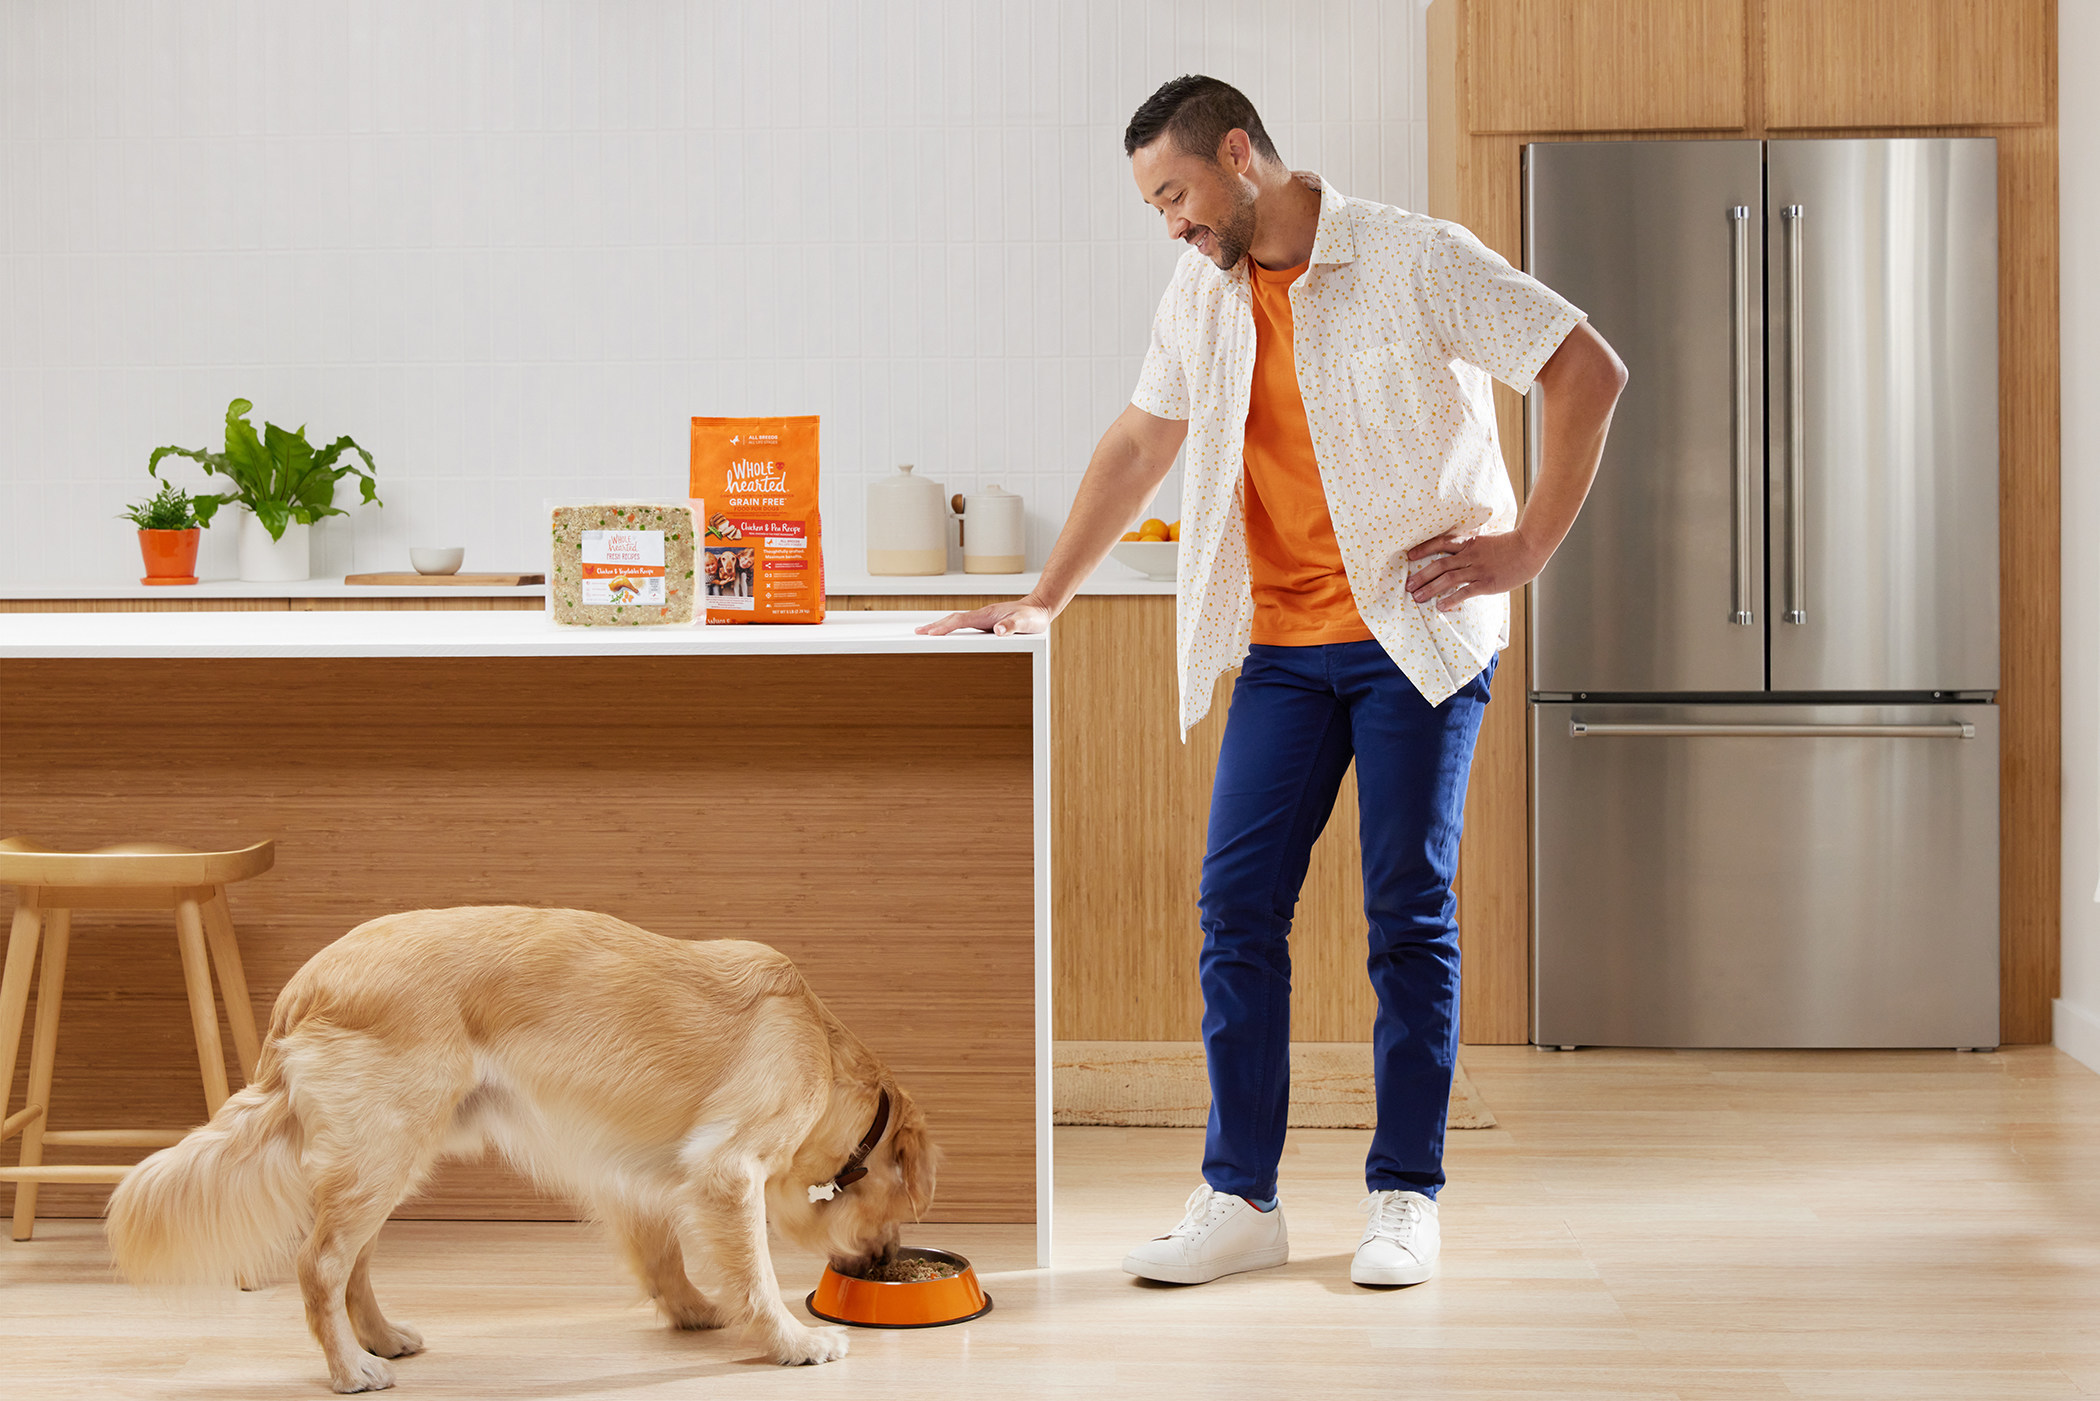 Petco expands same-day delivery of fresh, frozen pet foods